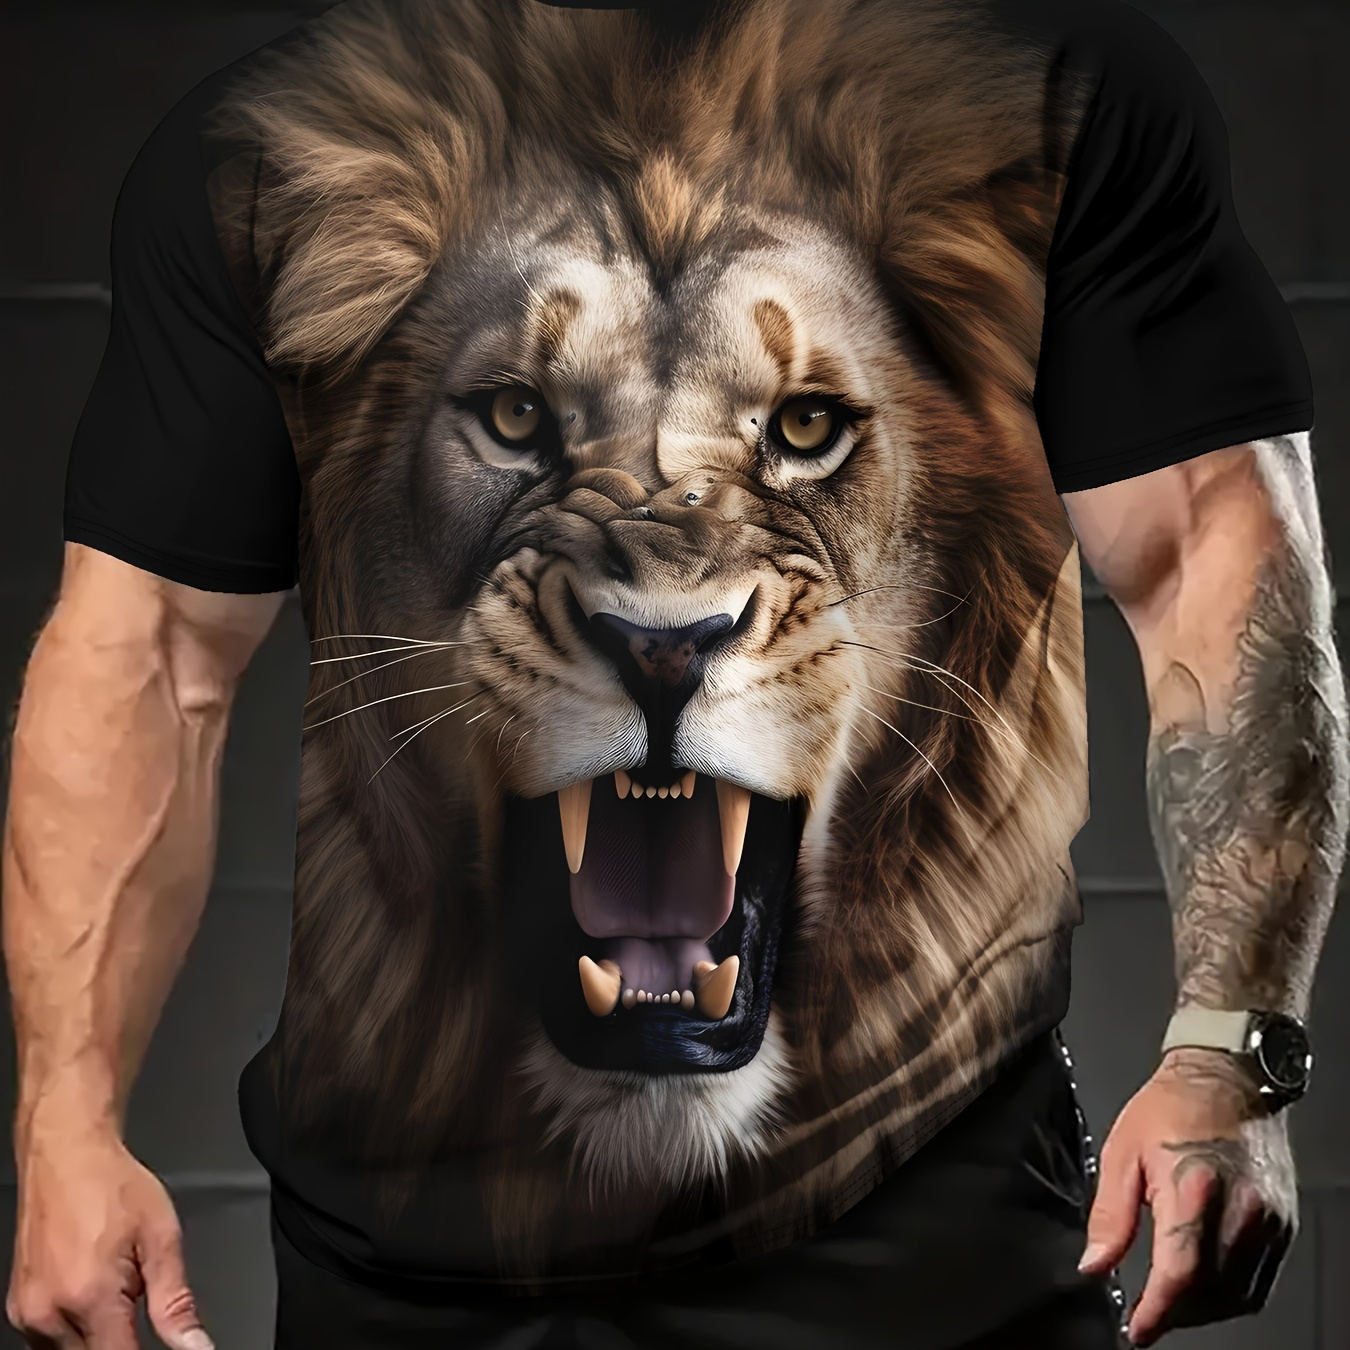 

3d Printed Lion Crew Neck Short Sleeve T-shirt For Men, Casual Summer T-shirt For Daily Wear And Vacation Resorts